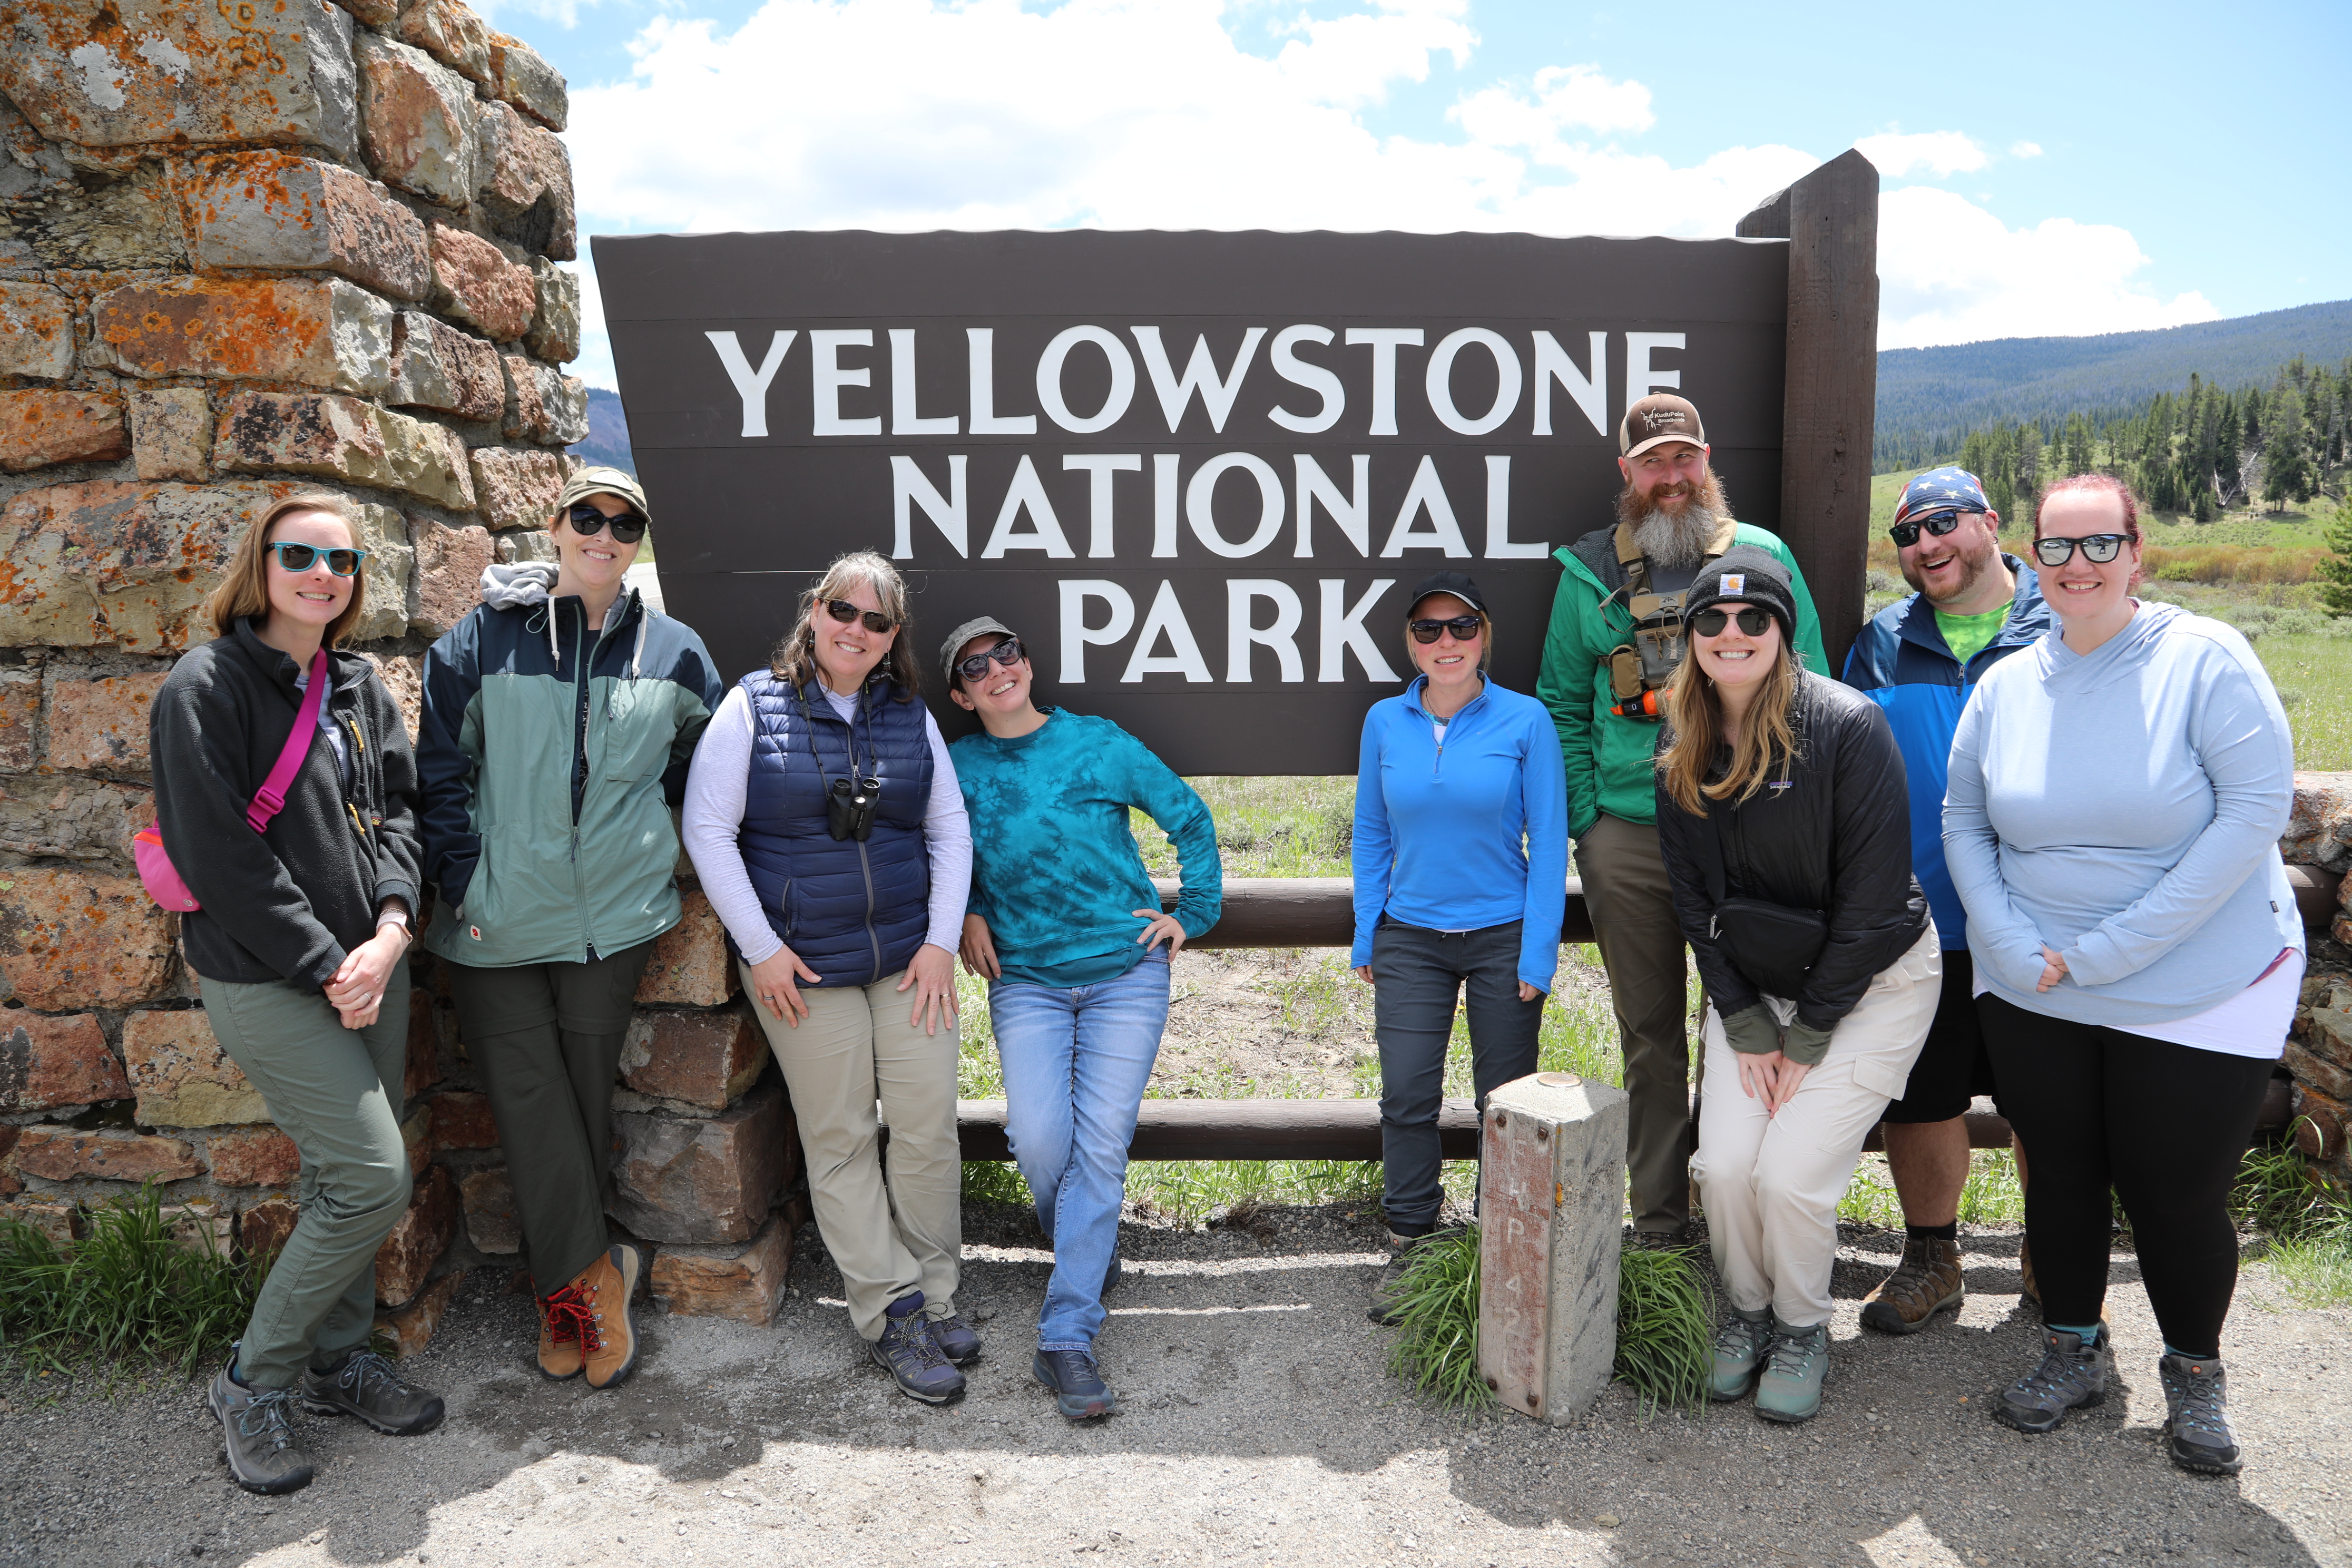 Students posing in front of Yellowstone National Park sign